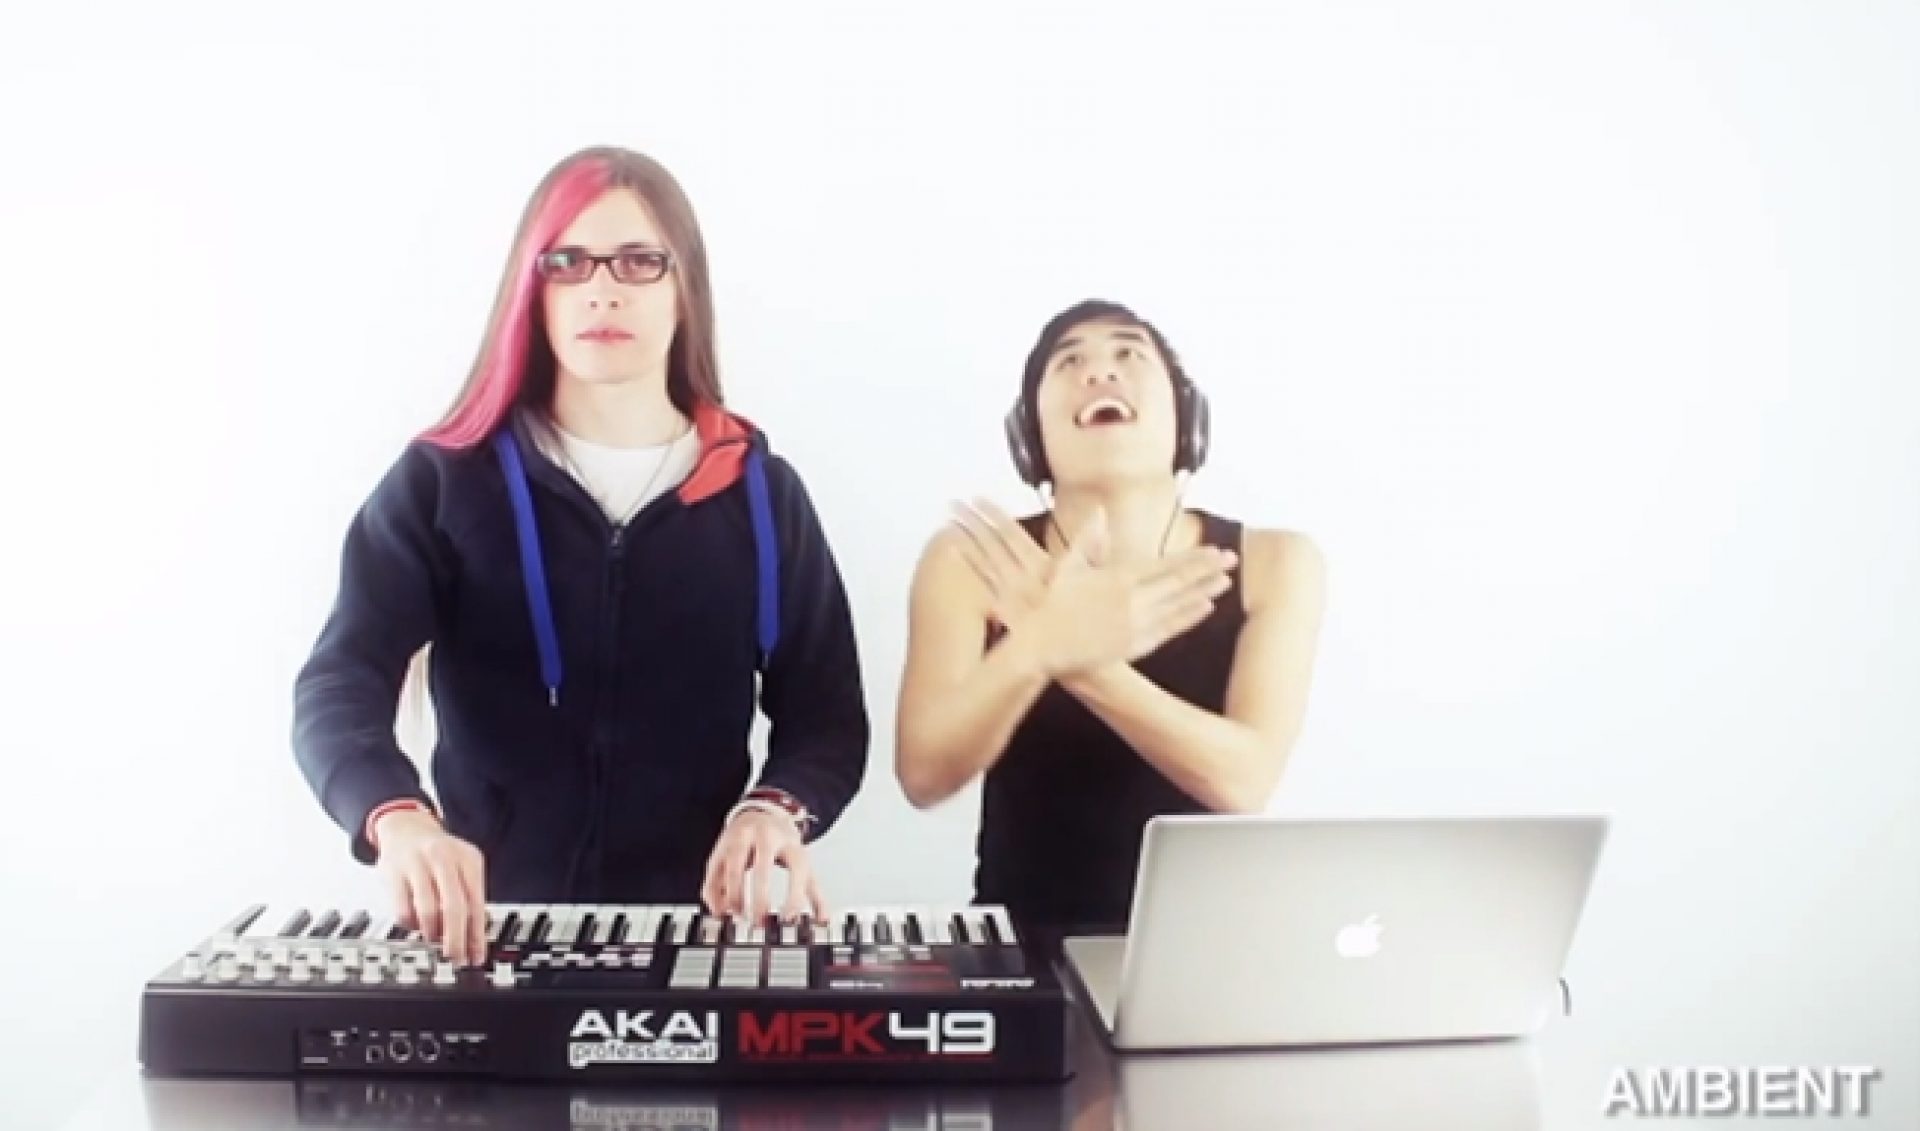 Genre Mashups Are Making A Mark On YouTube (Because They Rule)